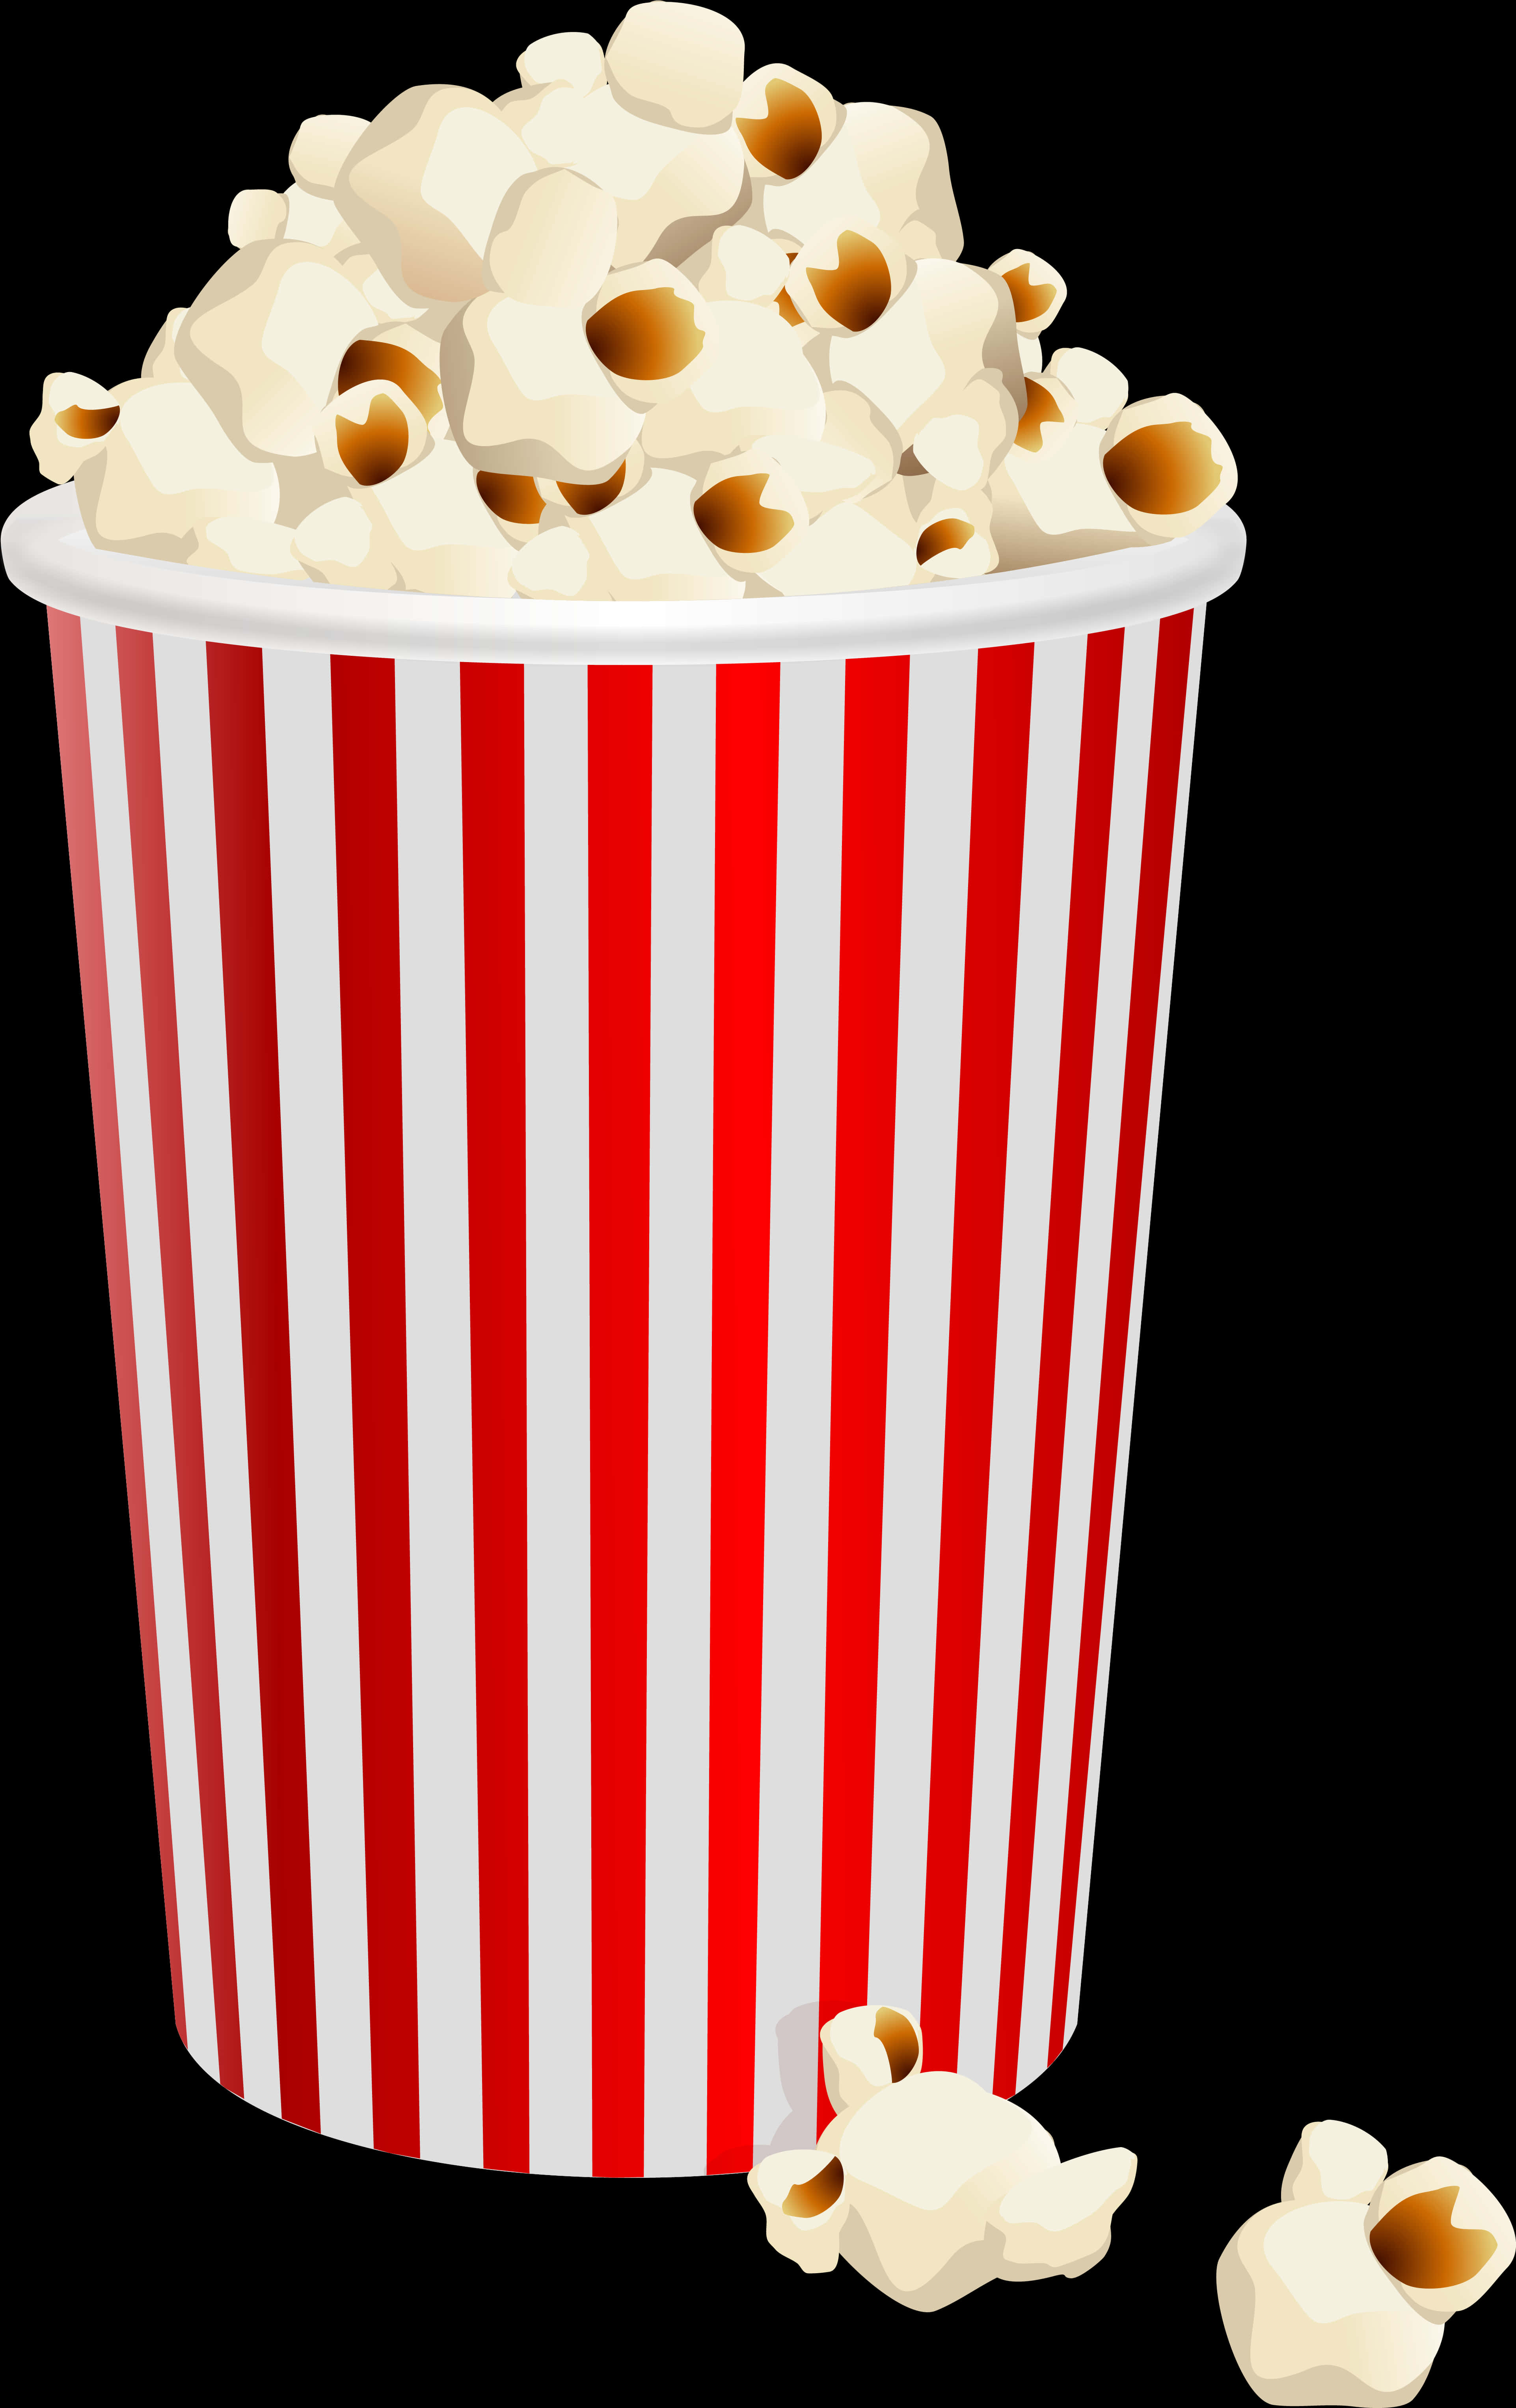 Striped Popcorn Bucket Clipart PNG image